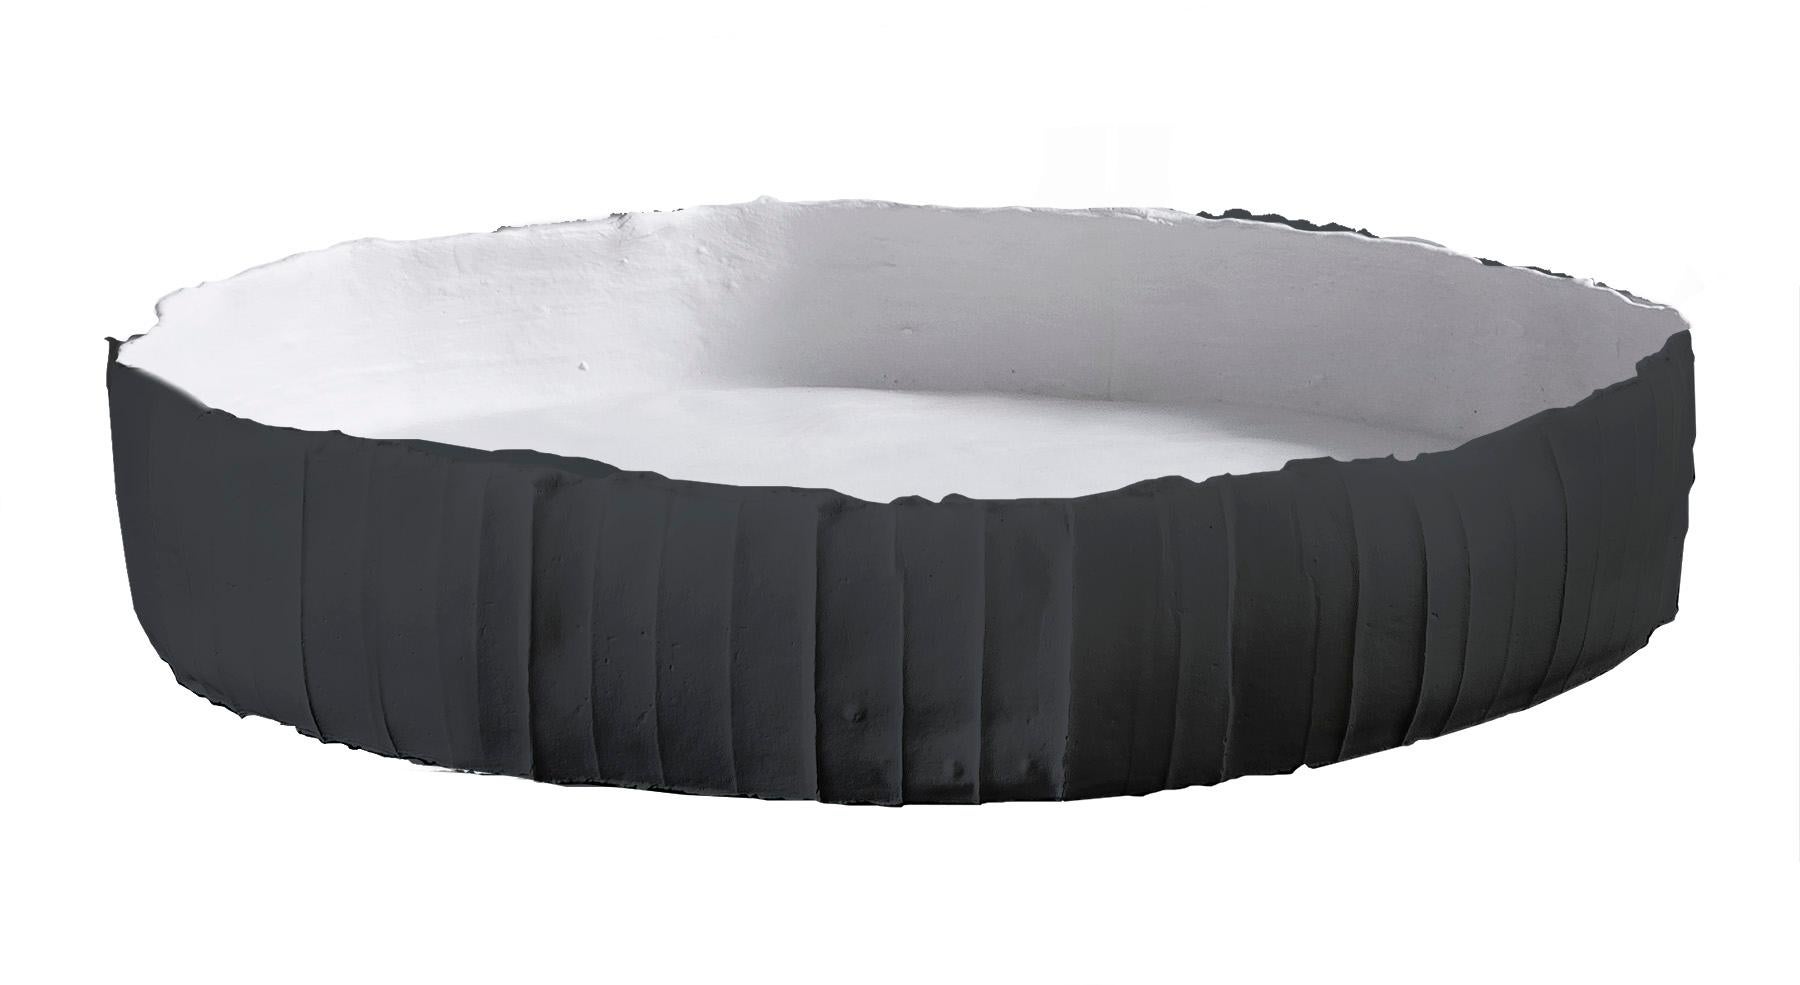 A piece with strong, modern character, this captivating tray was handcrafted of paper clay (clay-base compound mixed with natural fibers), the slightly irregular circular shape finished with a bright white interior and a black raised border that